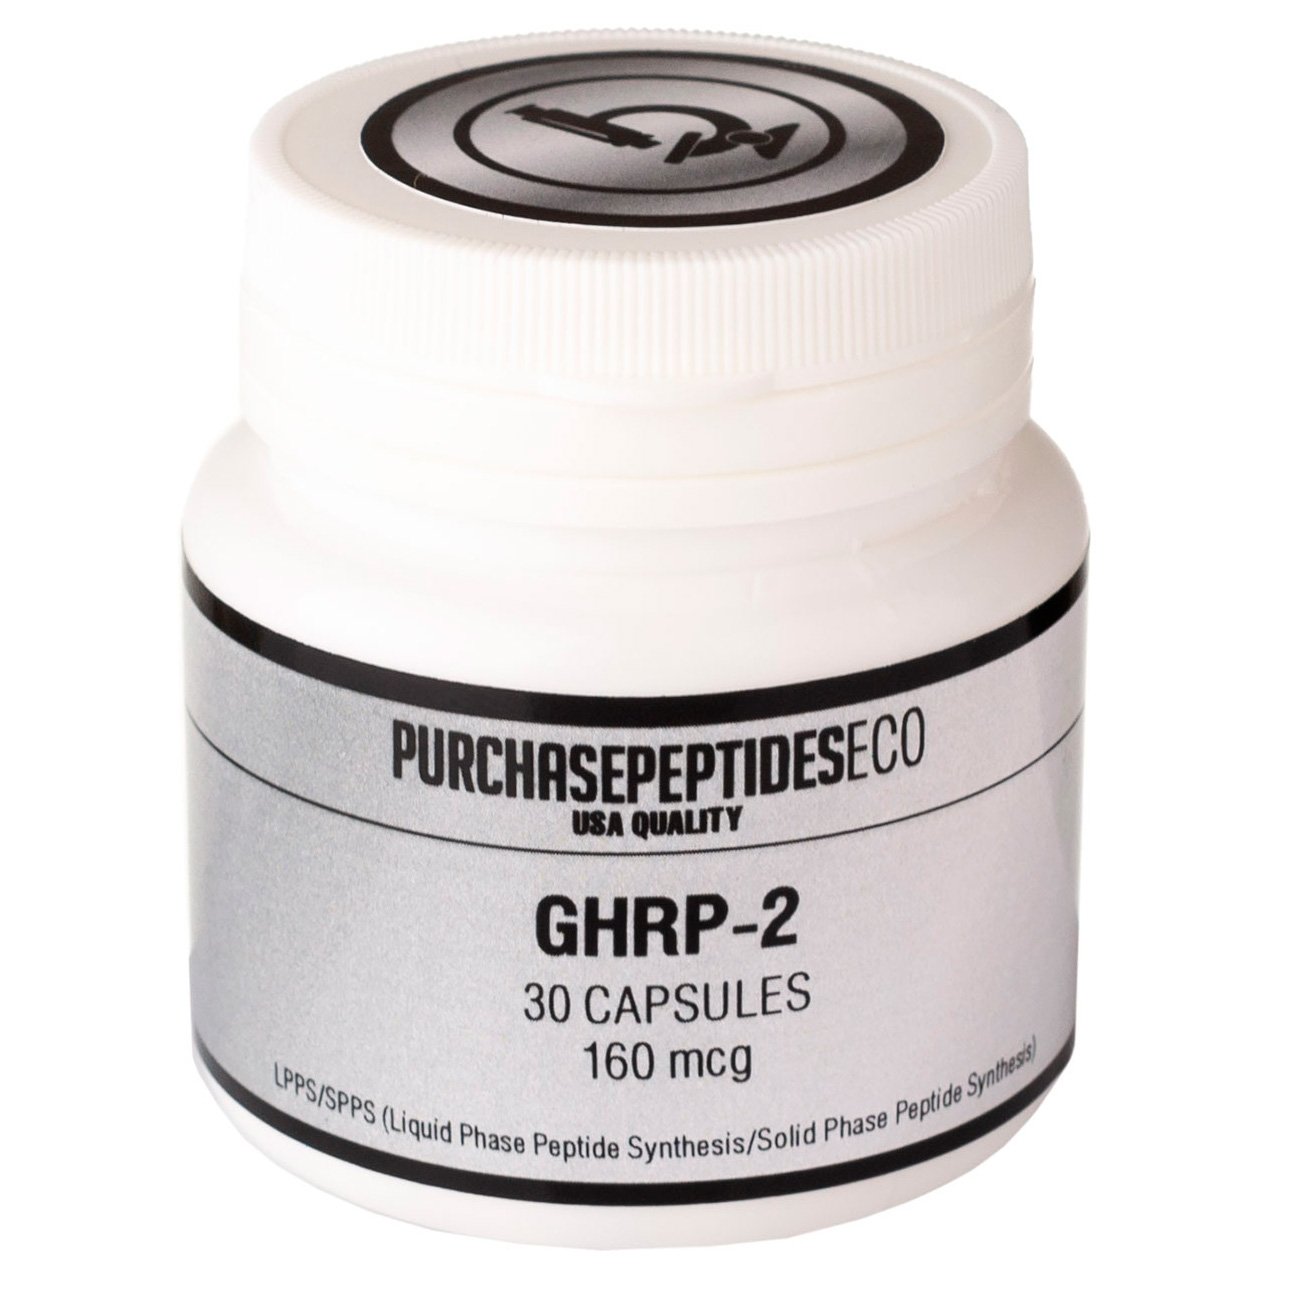 PurchasepeptidesEco GHRP-2 капсулы, , 